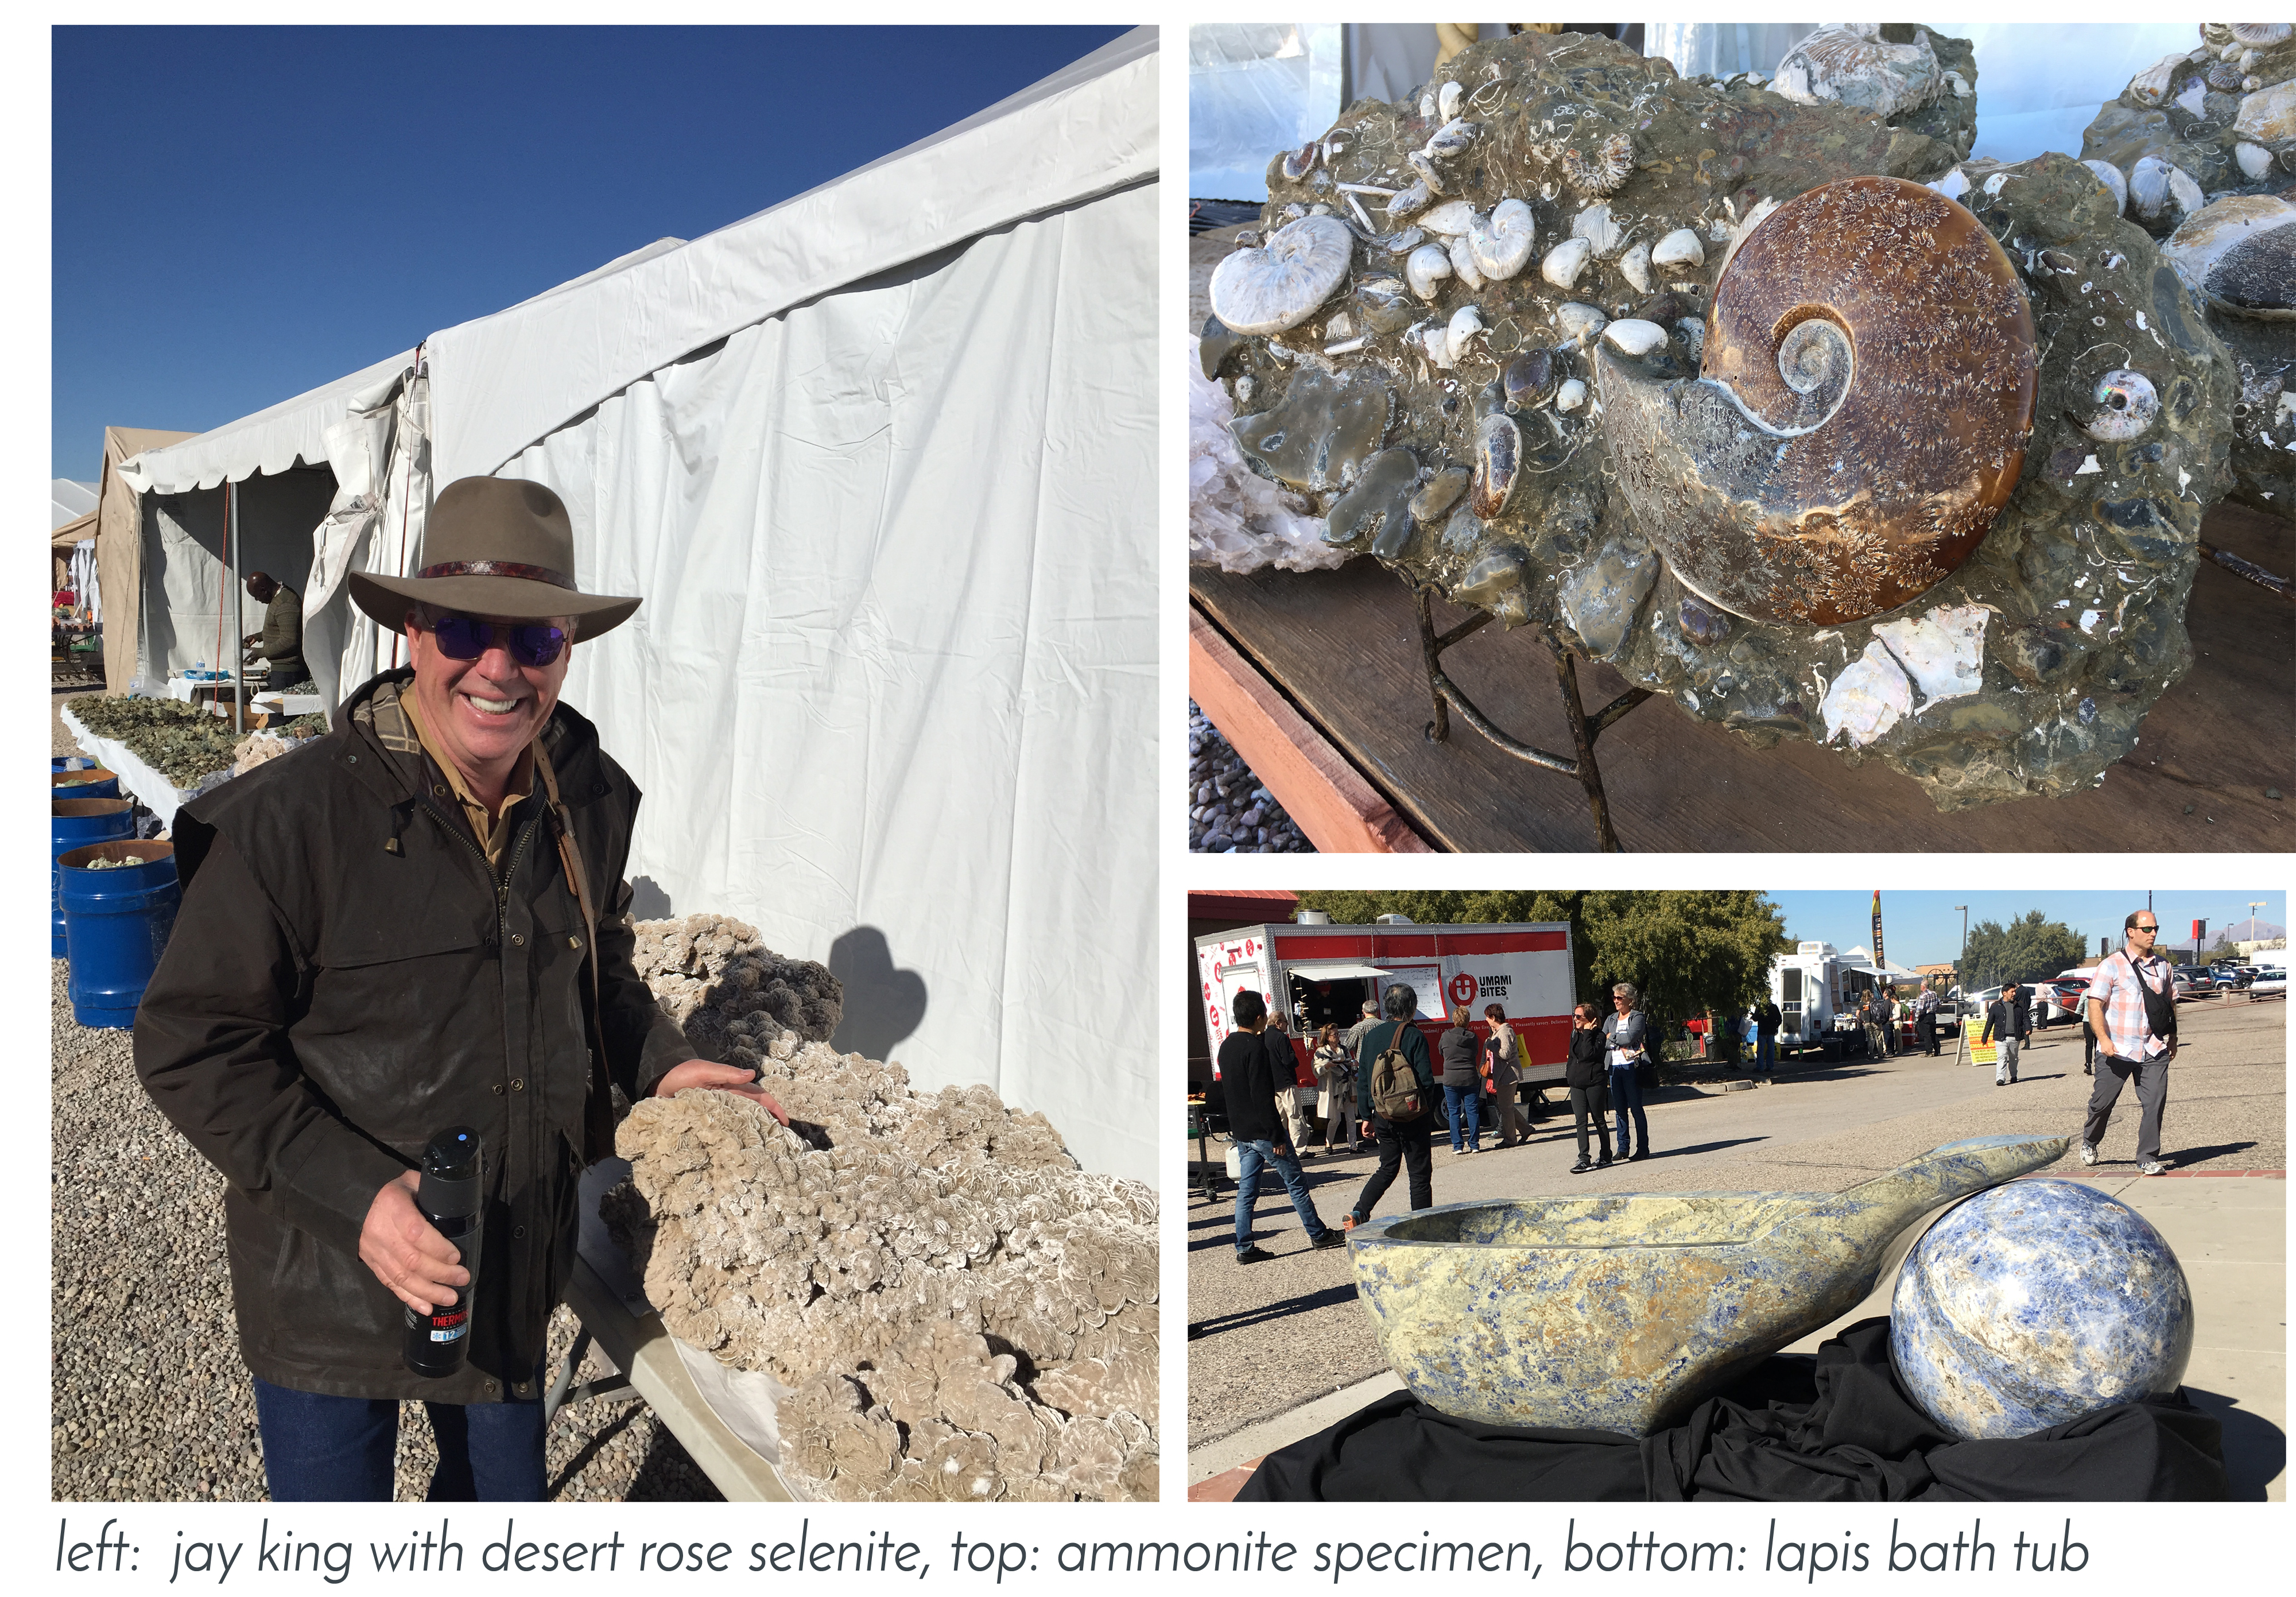 Journey to Tucson Gem & Mineral Show: Still Amazing Year After Year